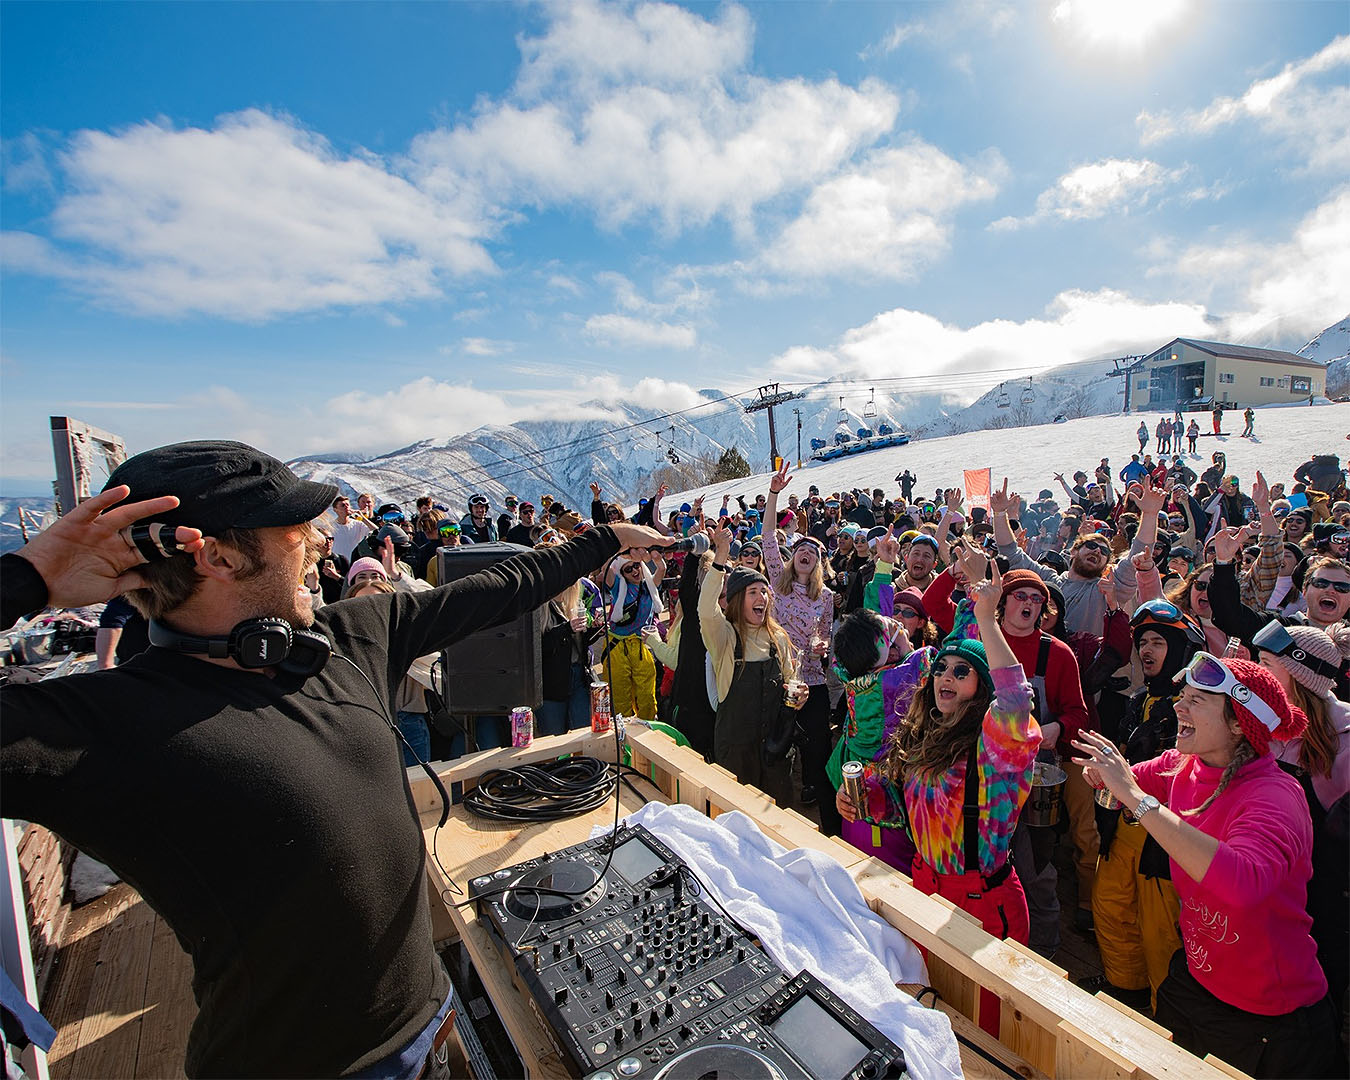 Revellers vibe up a mountain at Snow Machine, one of the best music festivals in NZ.